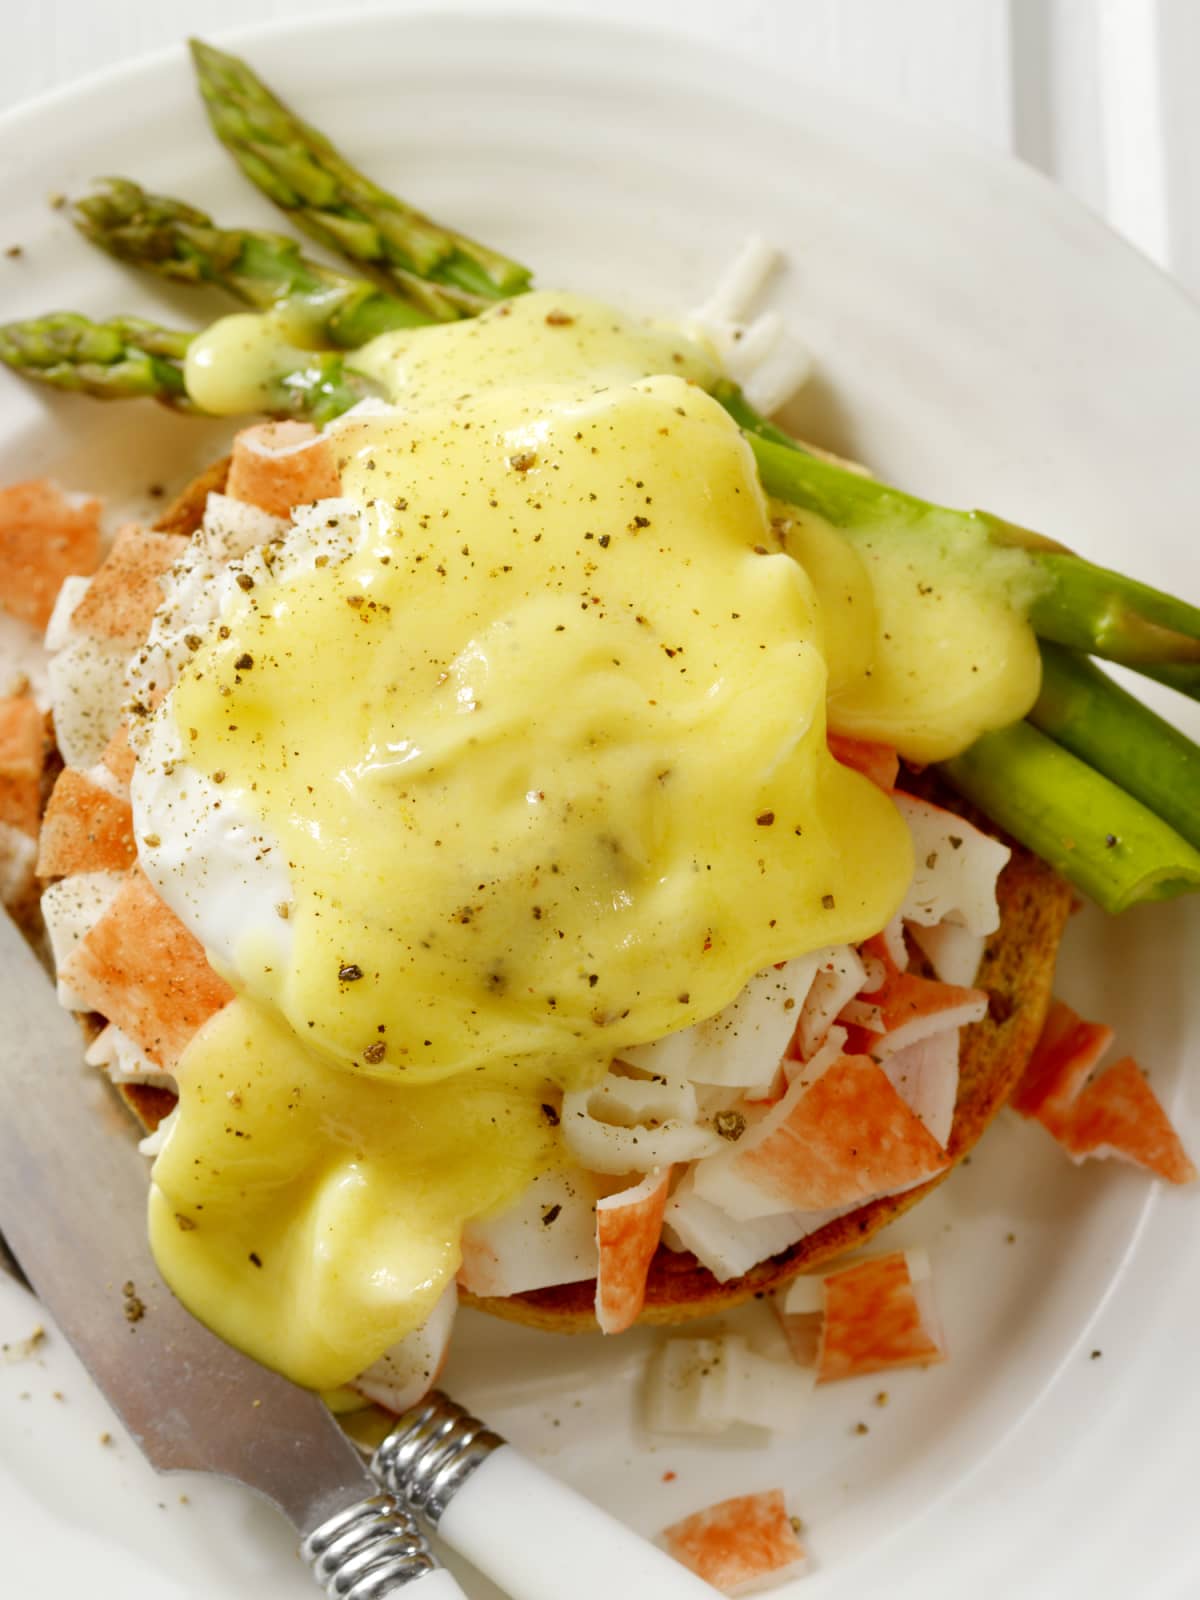 Lobster Eggs Benedict with Asparagus  -Photographed on Hasselblad H3D2-39mb Camera